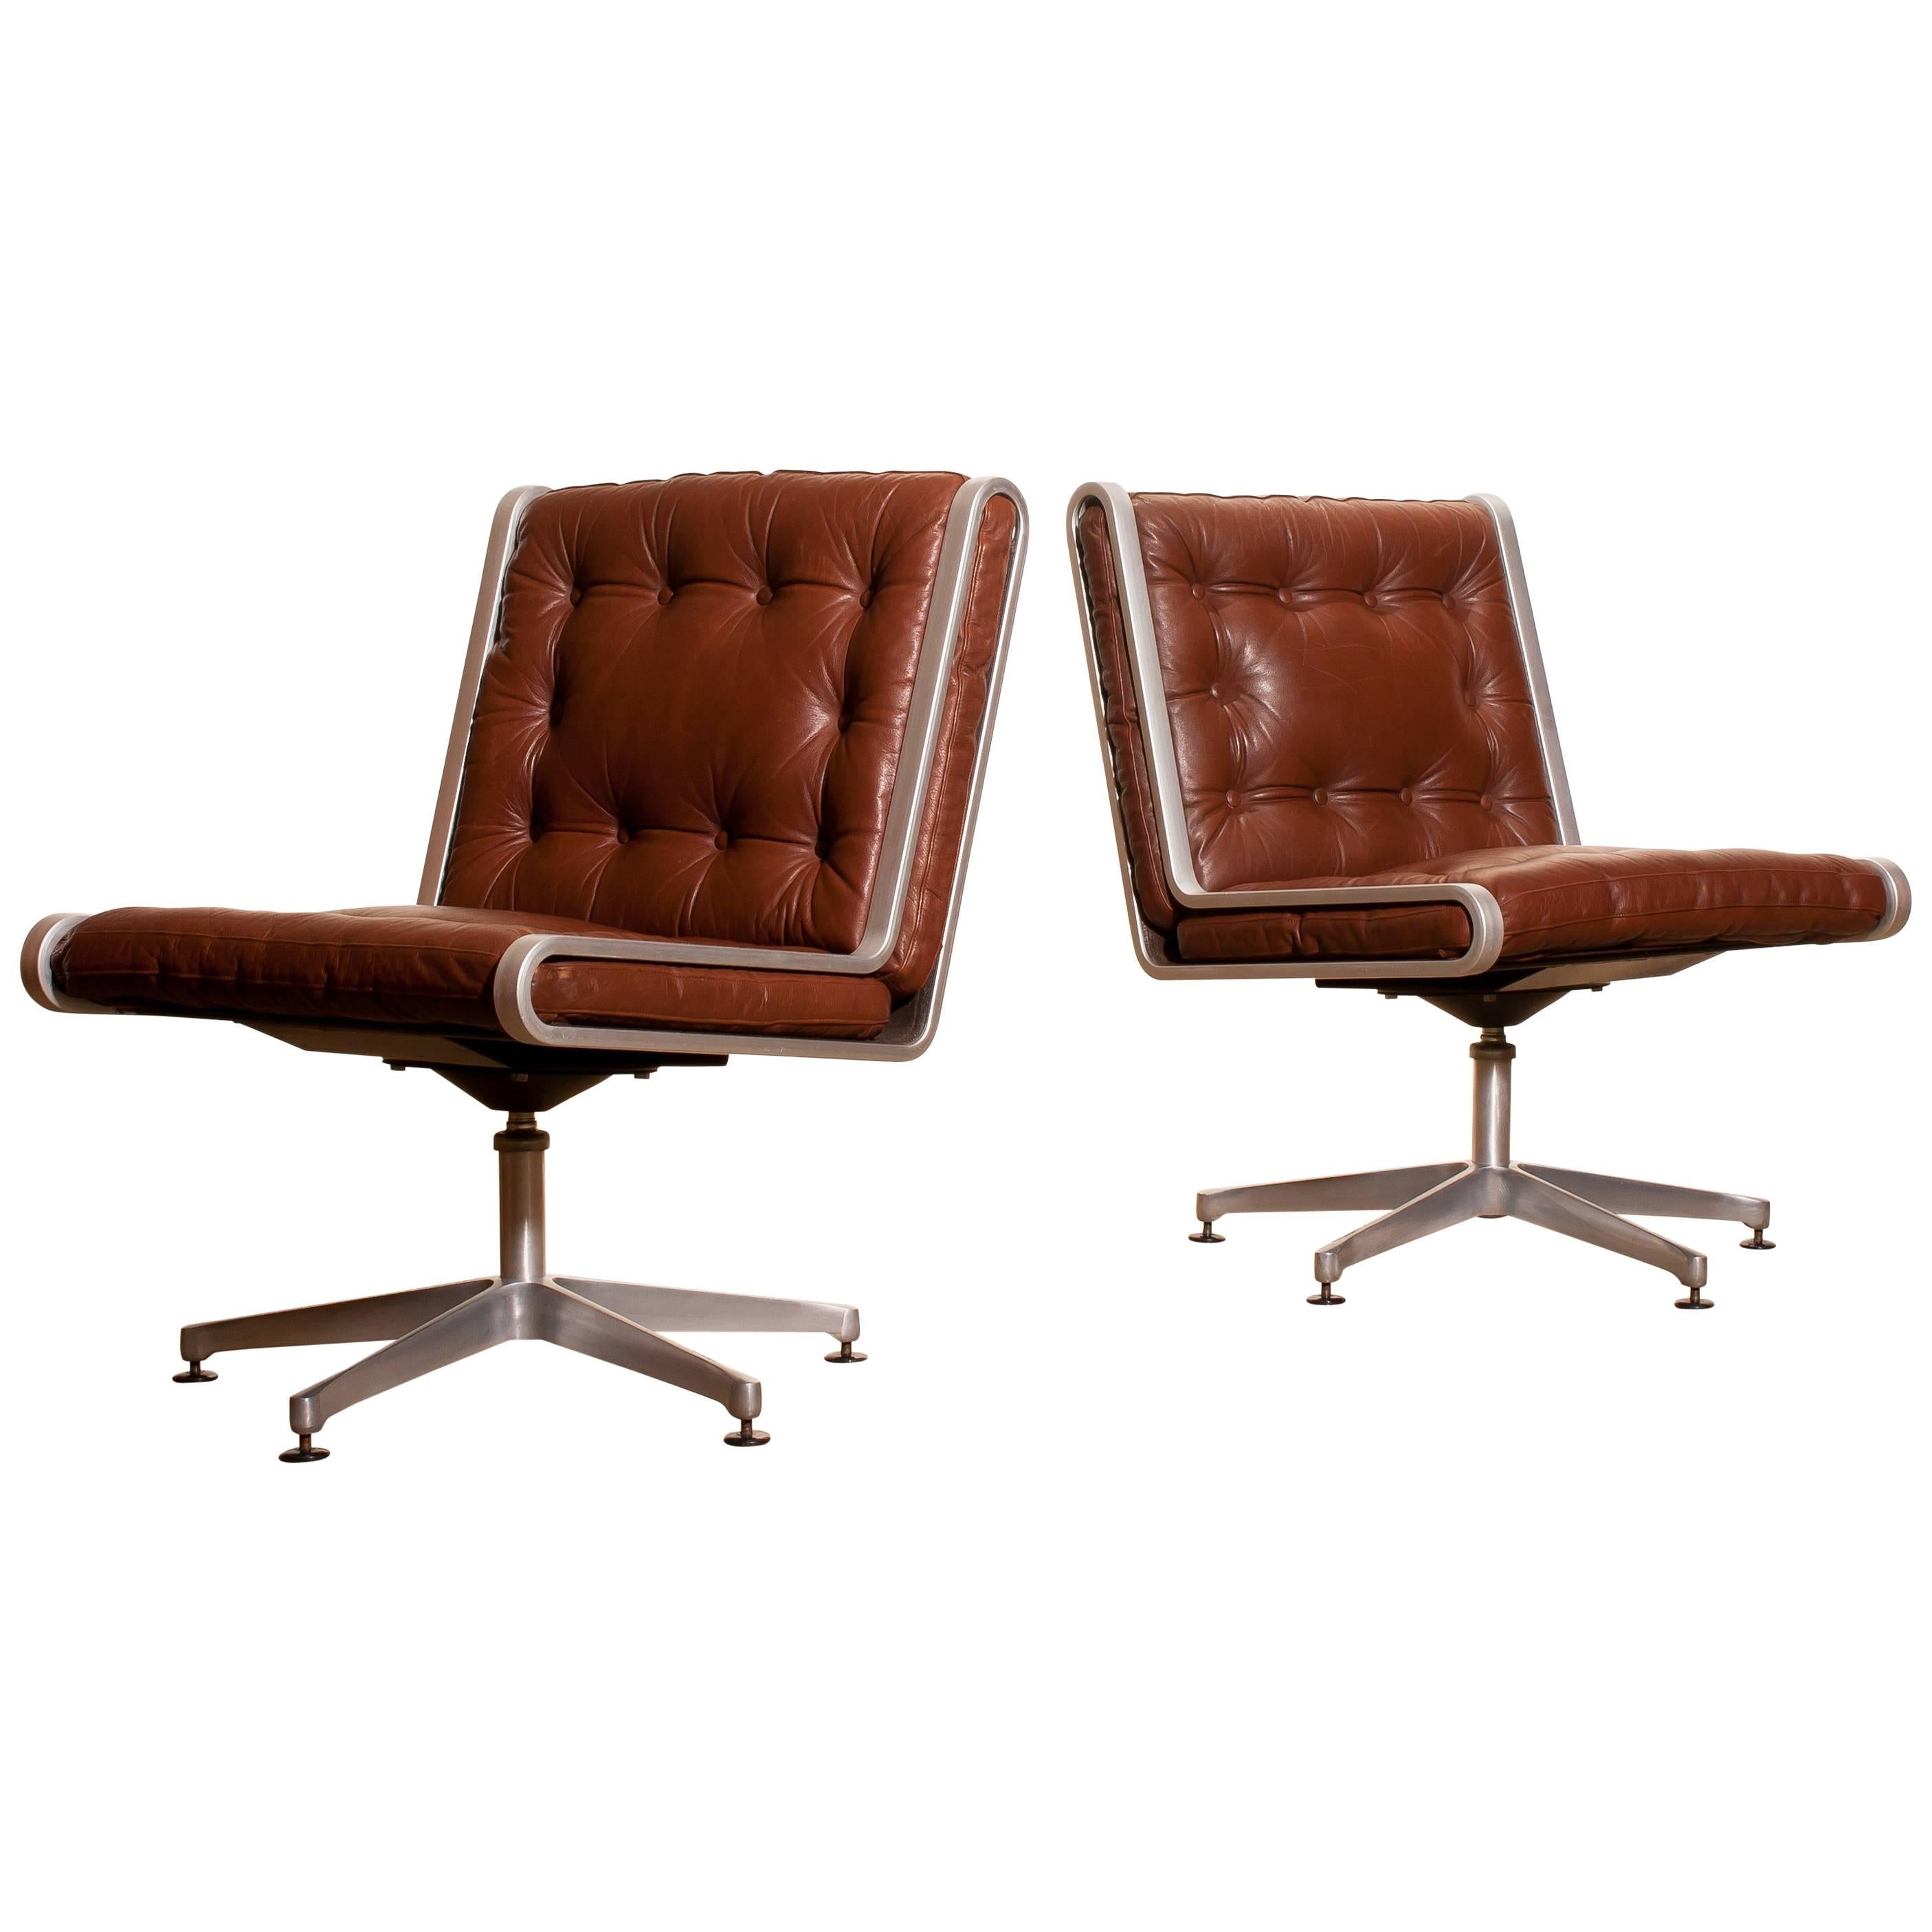 1970s, Pair of Leather and Aluminium Swivel Chairs